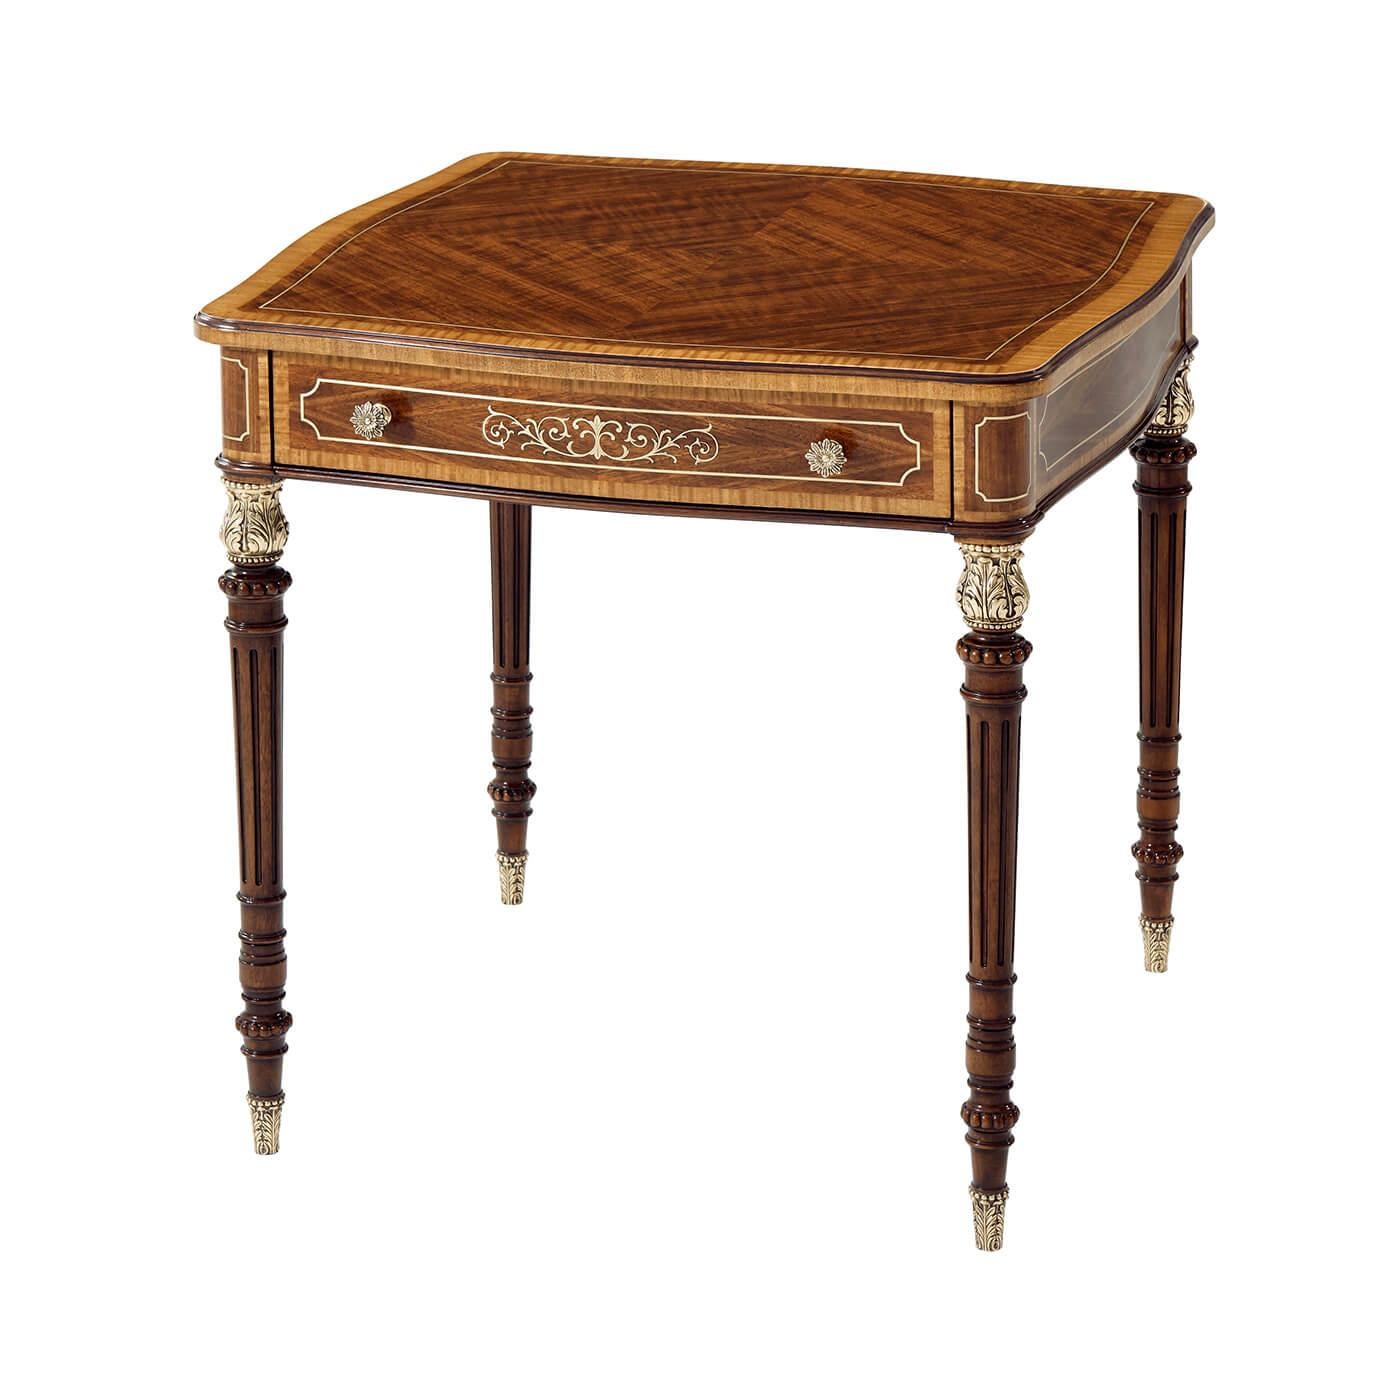 English Regency style mahogany and exotic wood veneer side table with floral and brass line inlaid details on turned gilded acanthus capital supports with fluting.

Dimensions: 26